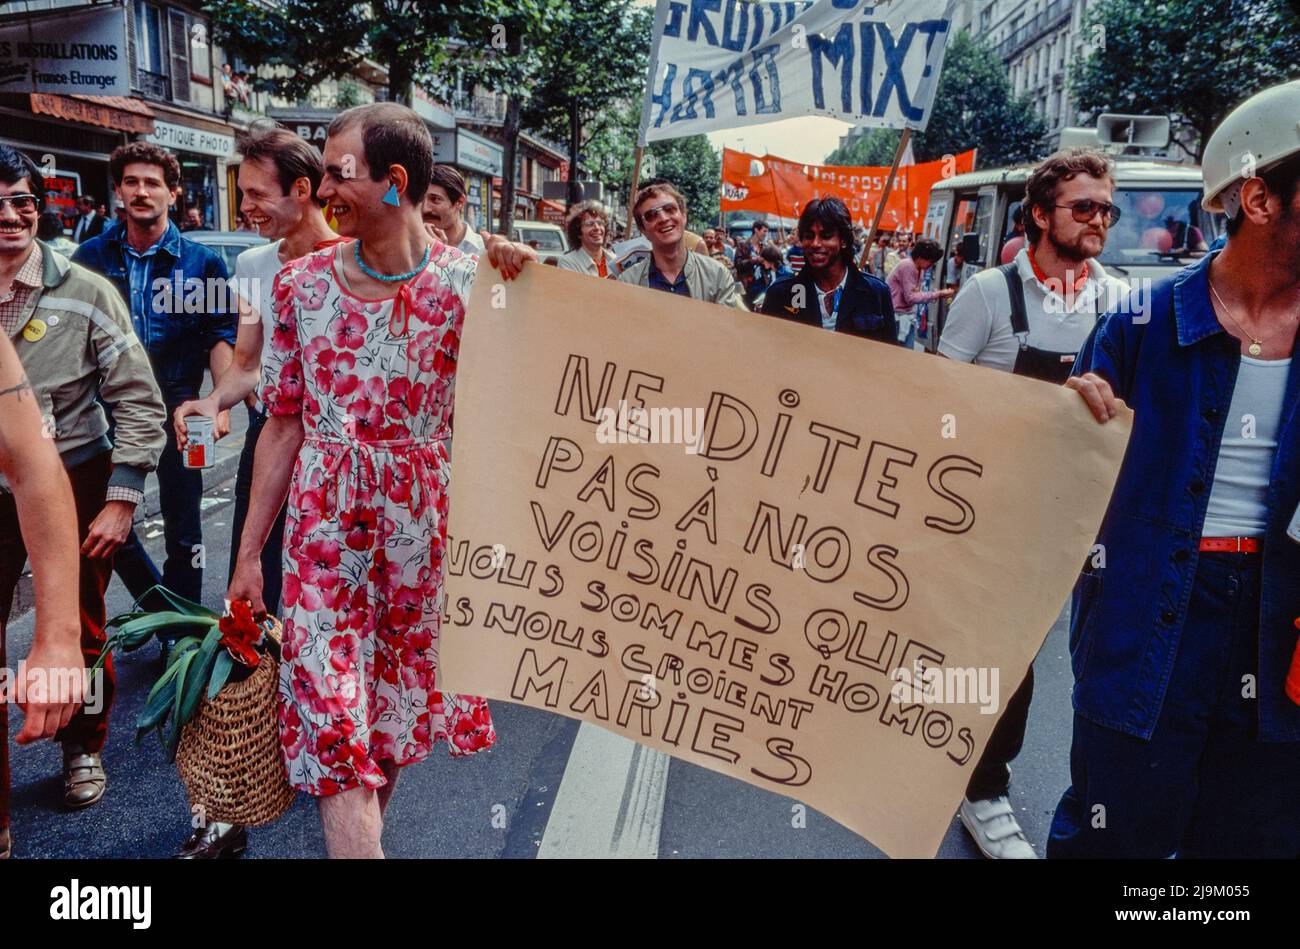 Paris, France, Large Crowd of People, LGBTQI, MAn in Dress Marching with Funny Protest Signe 'Don't Tell our Neighbors...' Gay Pride March, 1982, 1980s Archives, France, gay protest vintage Stock Photo